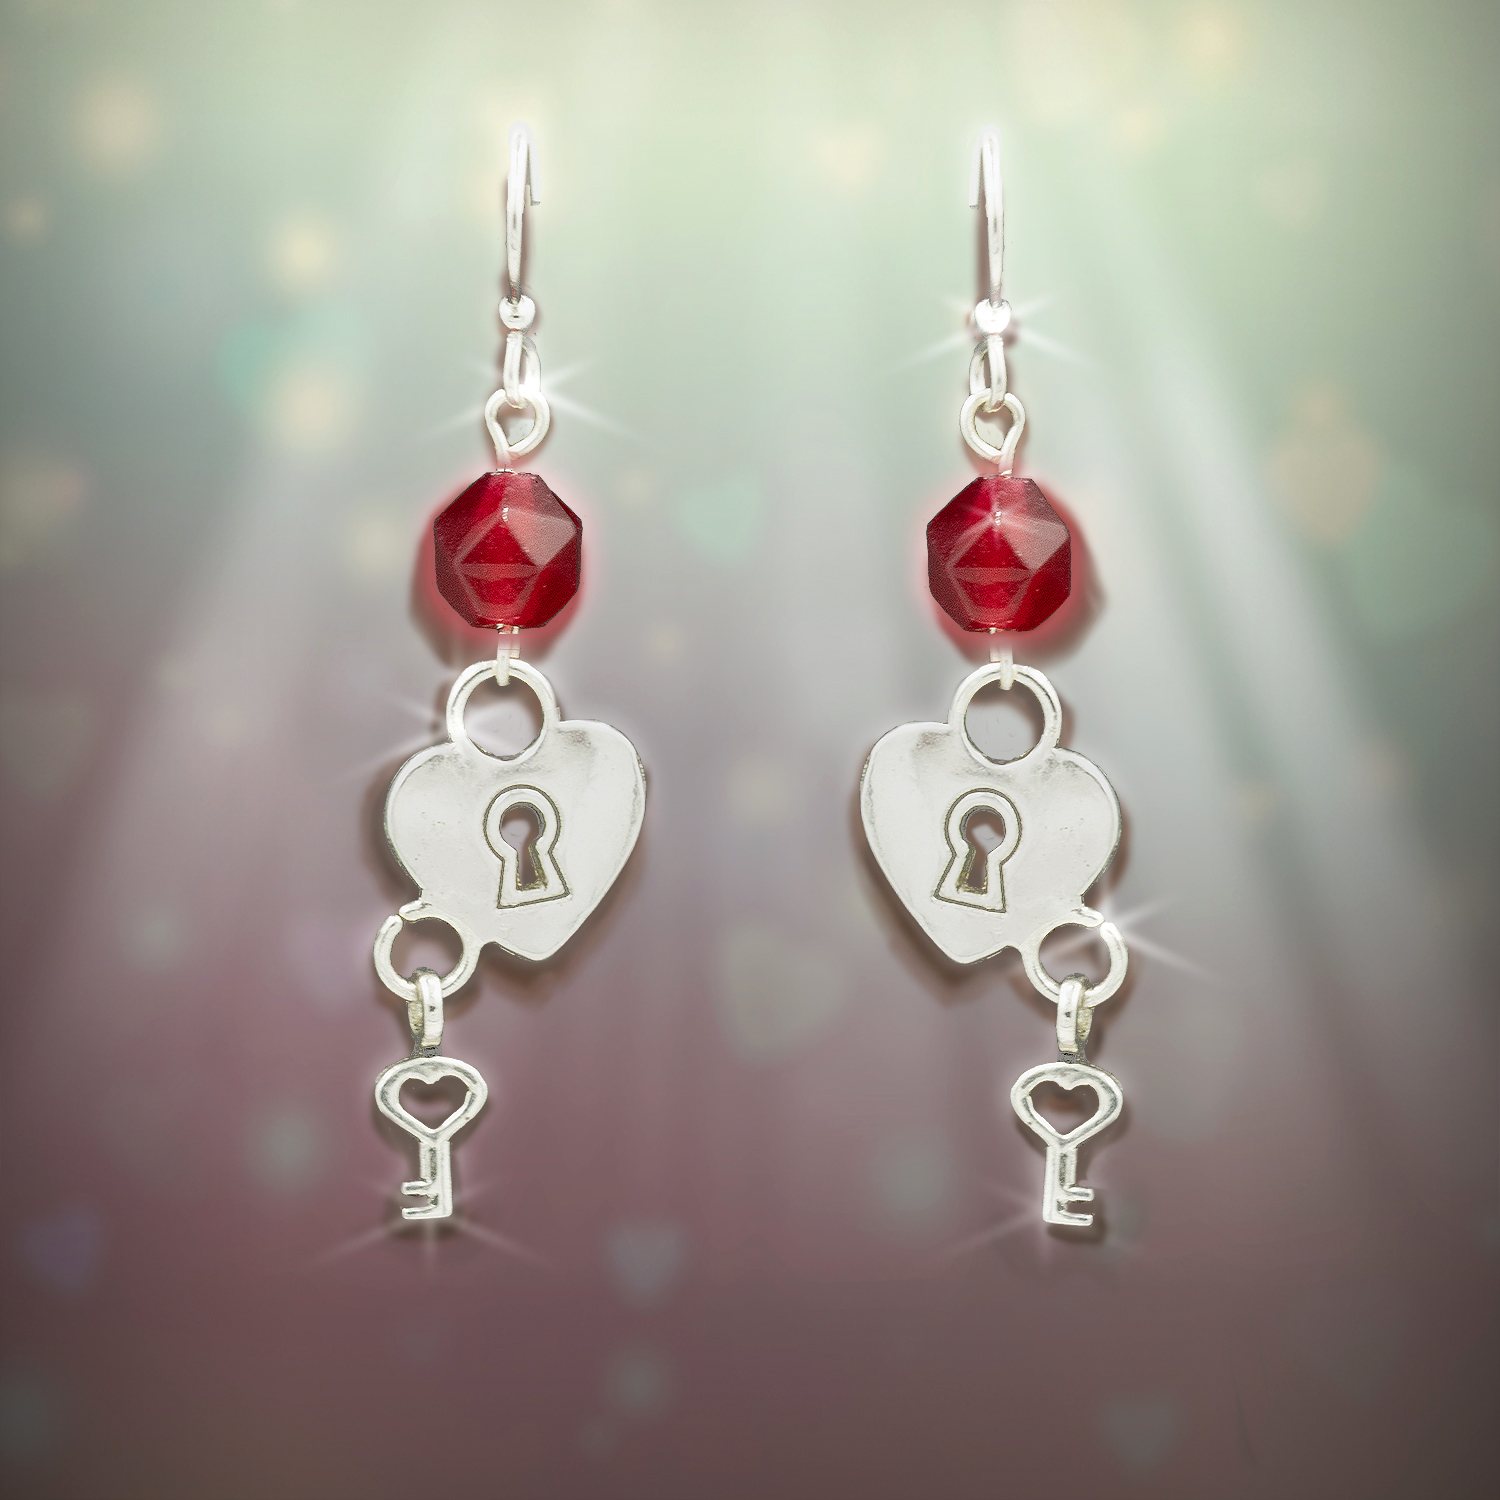 The Key To Your Heart Soulmate Earrings